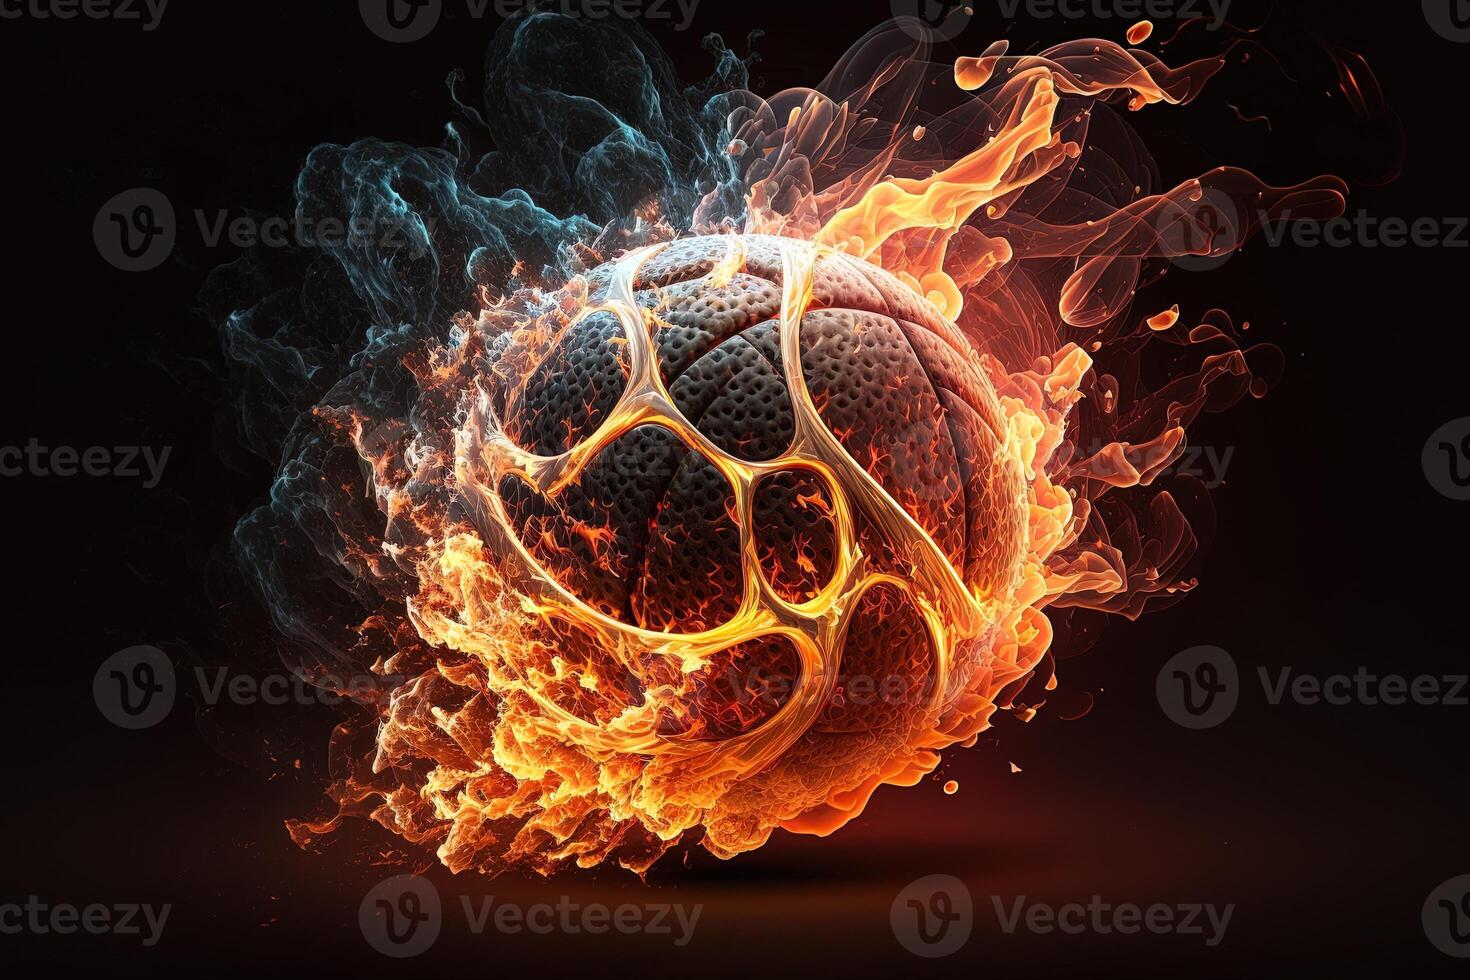 of a Glowing Ball Burning on Fire in Orange Flames, Giving off Heat and Smoke for Competitive Basketball A Visual representation of the Madness and Excitement of the Game photo